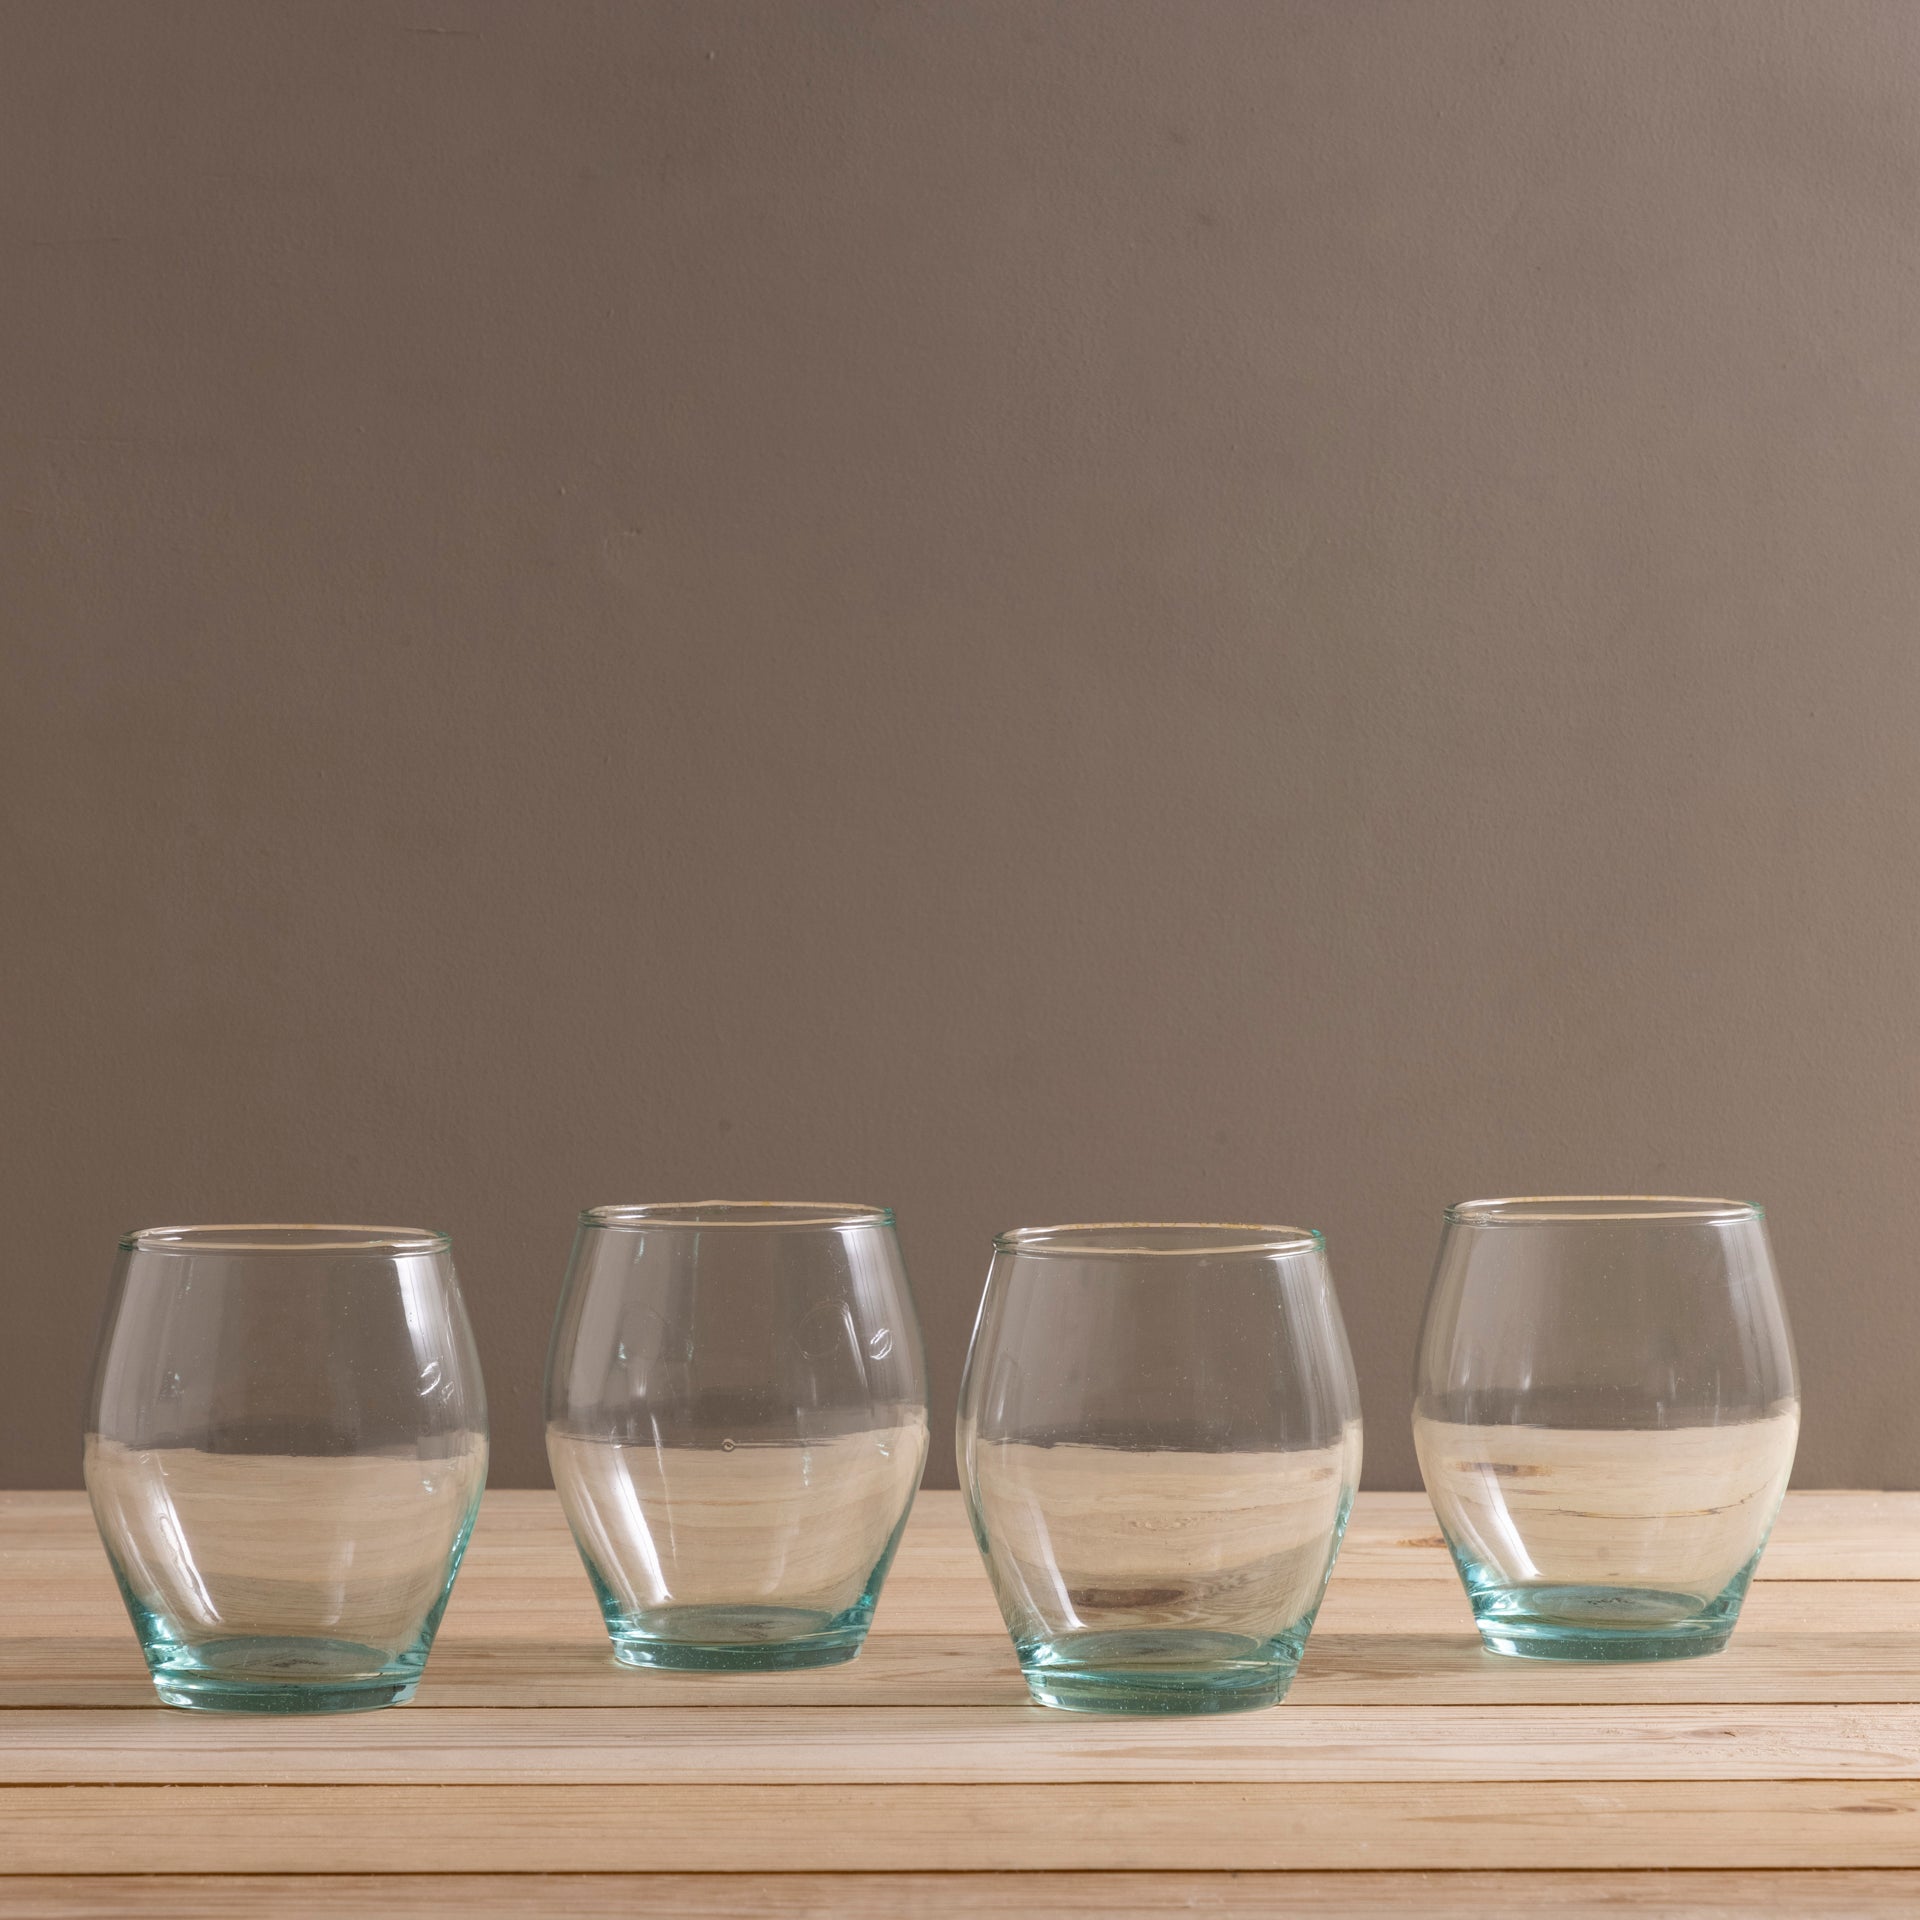 Stainless Steel Stemless Glasses - Four Piece Set – Palm City Products